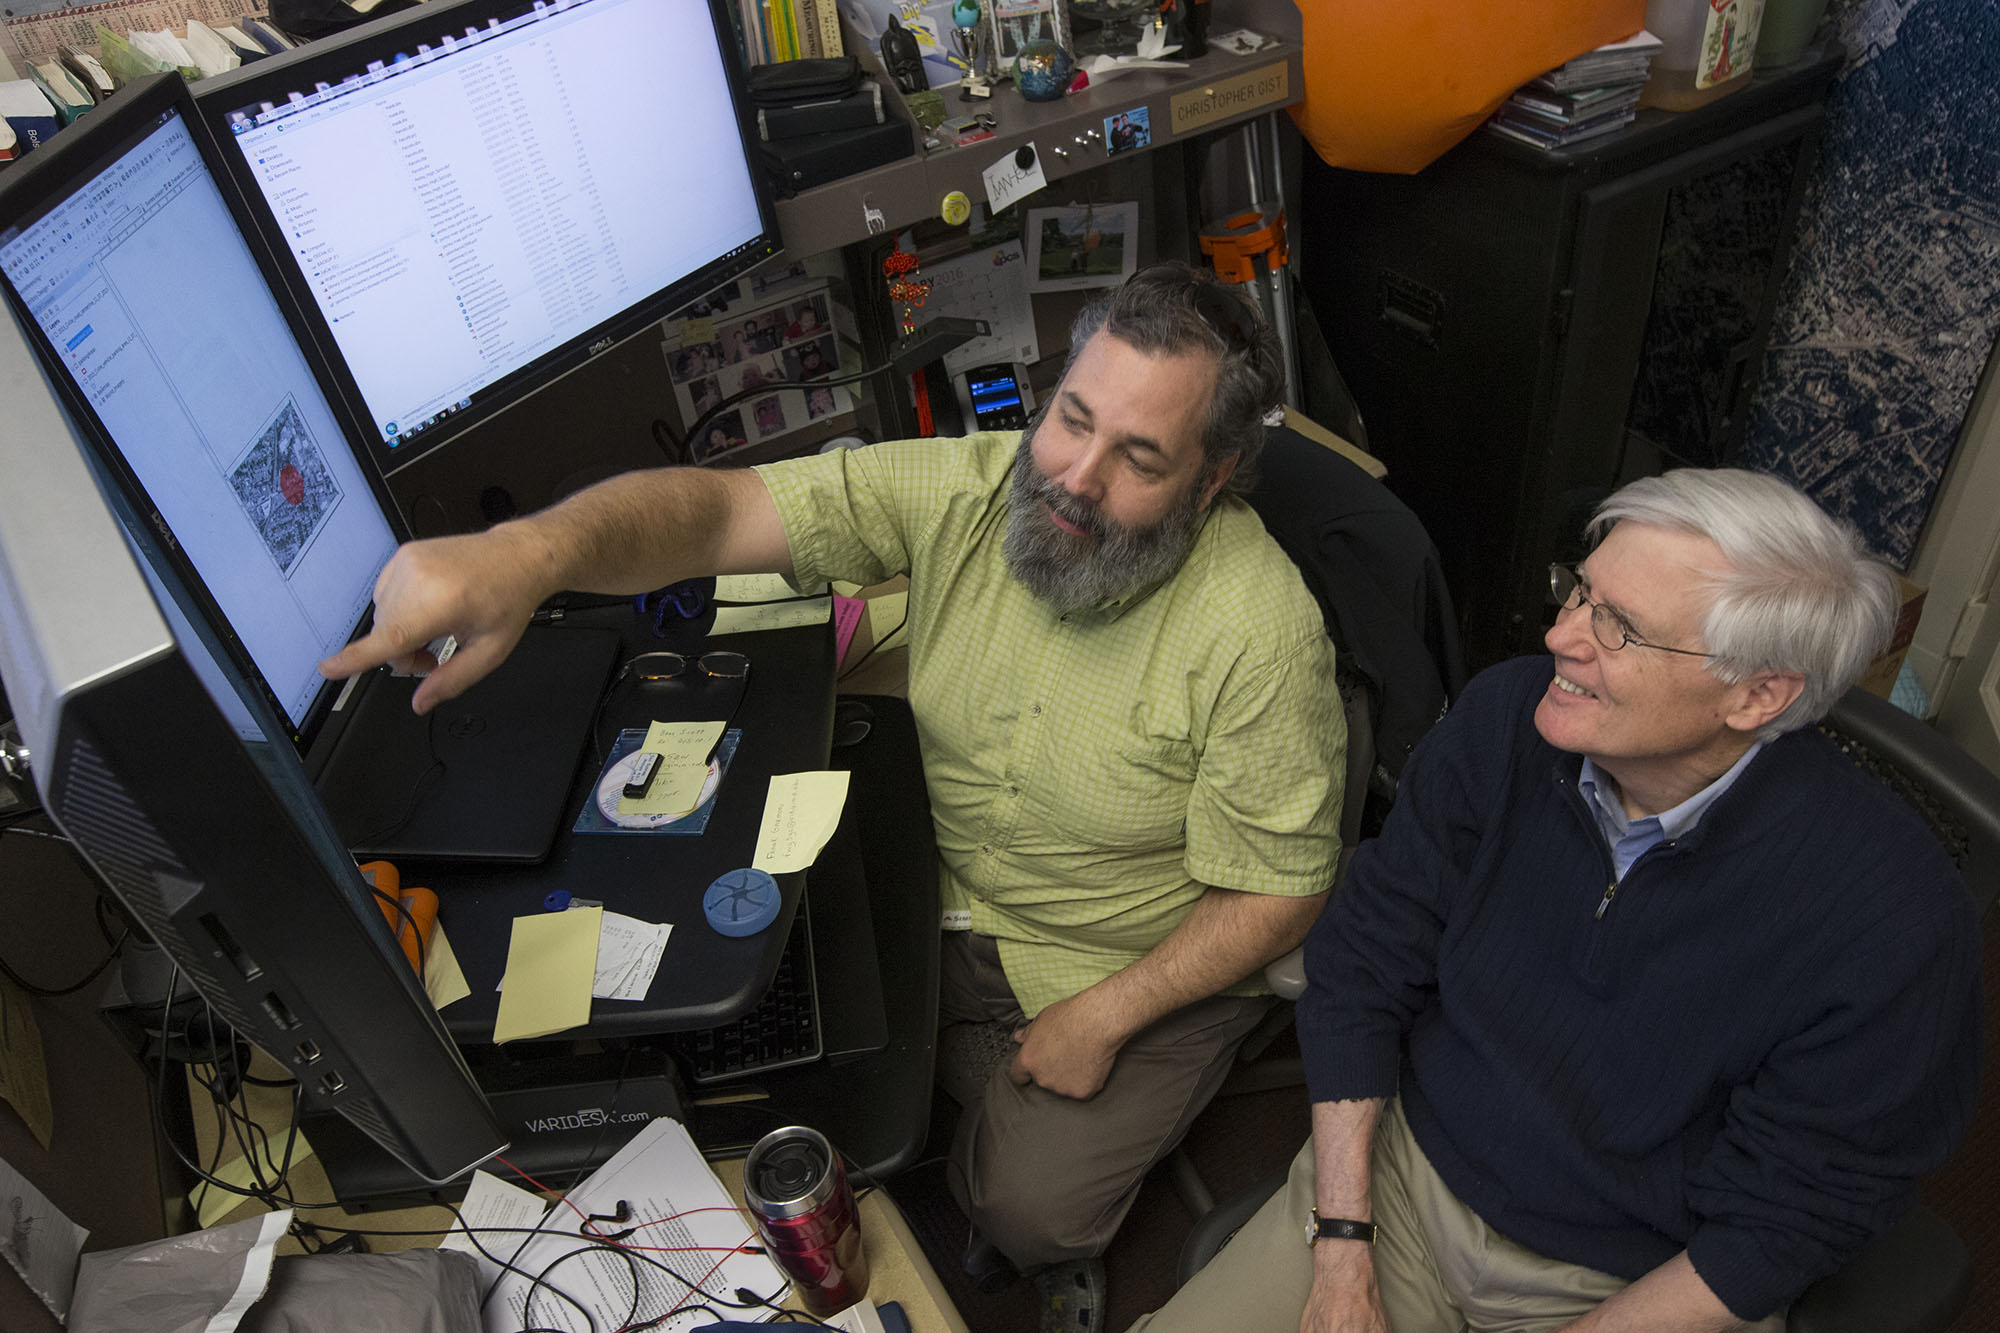 Chris Gist, left, and Benjamin Ray, right, used geographic information systems technology in UVA’s Scholar’s Lab to help identify the execution site in Salem. (Photo by Dan Addison)